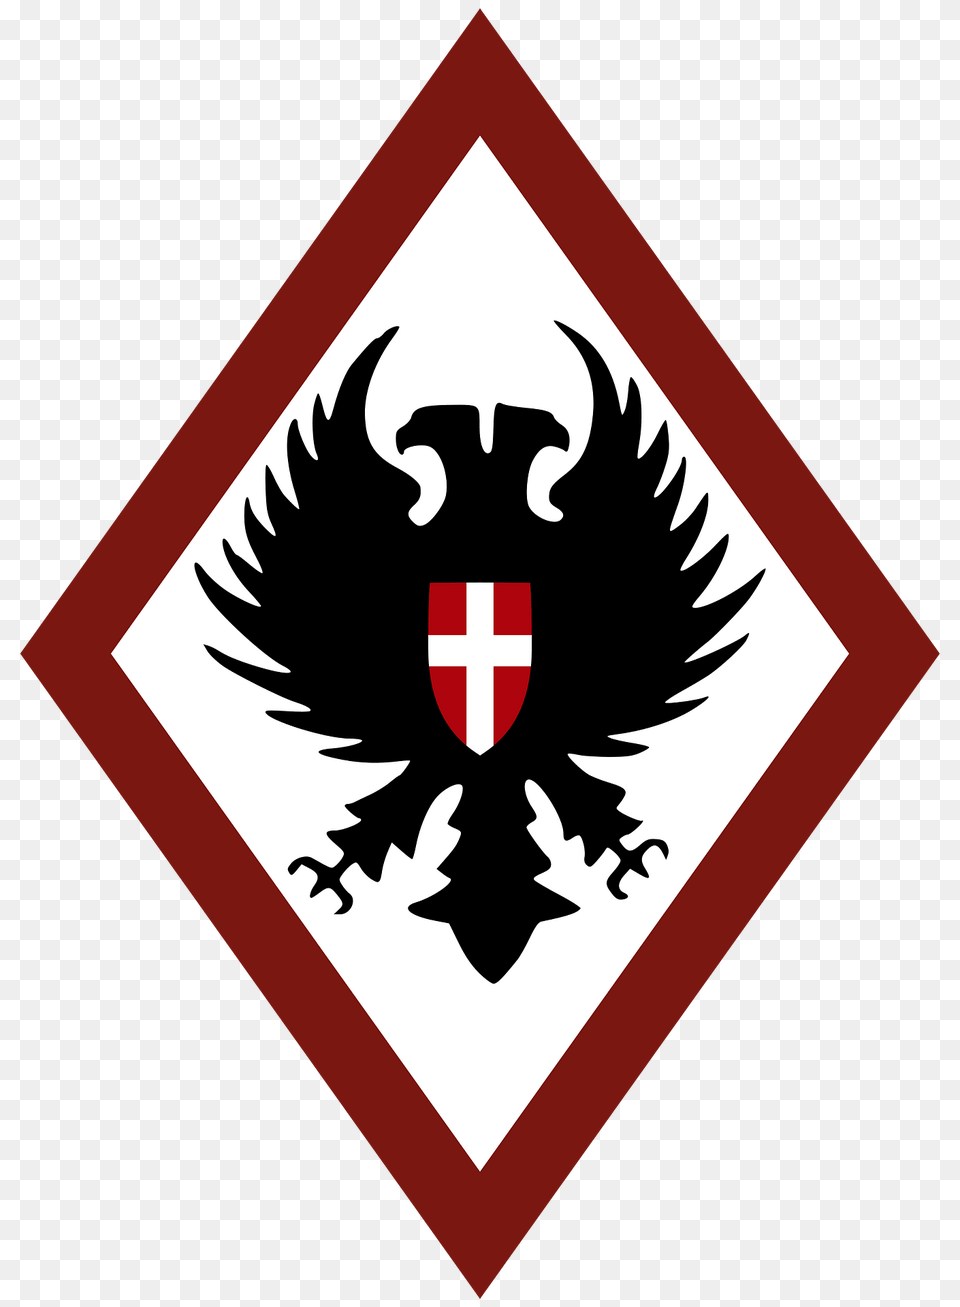 Ensign Of The 38 Stormo Of The Italian Air Force Clipart, Emblem, Symbol, Logo Free Transparent Png